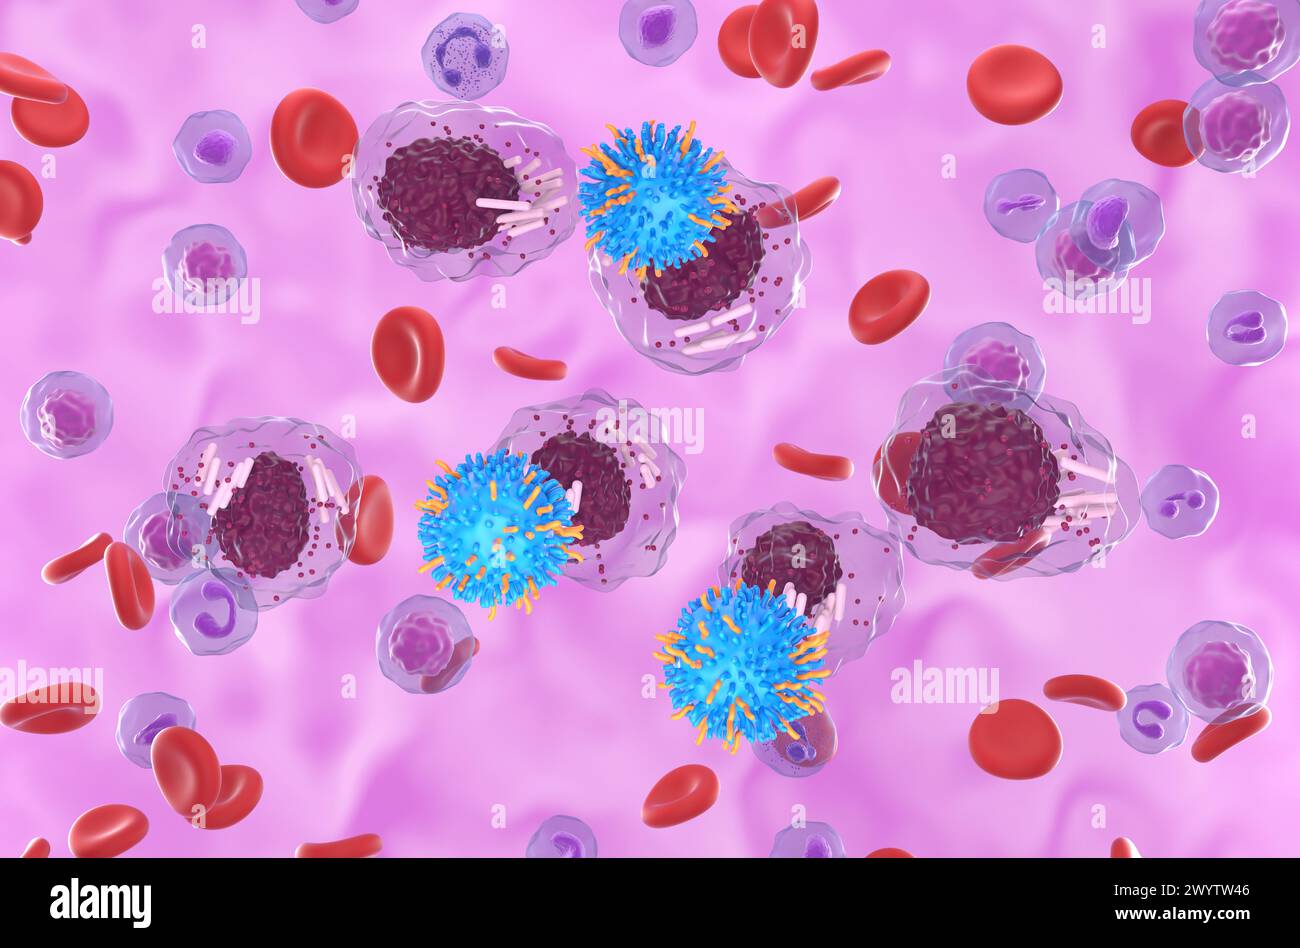 CAR T cell therapy in Chronic lymphocytic leukemia (CLL) - isometric view 3d illustration Stock Photo